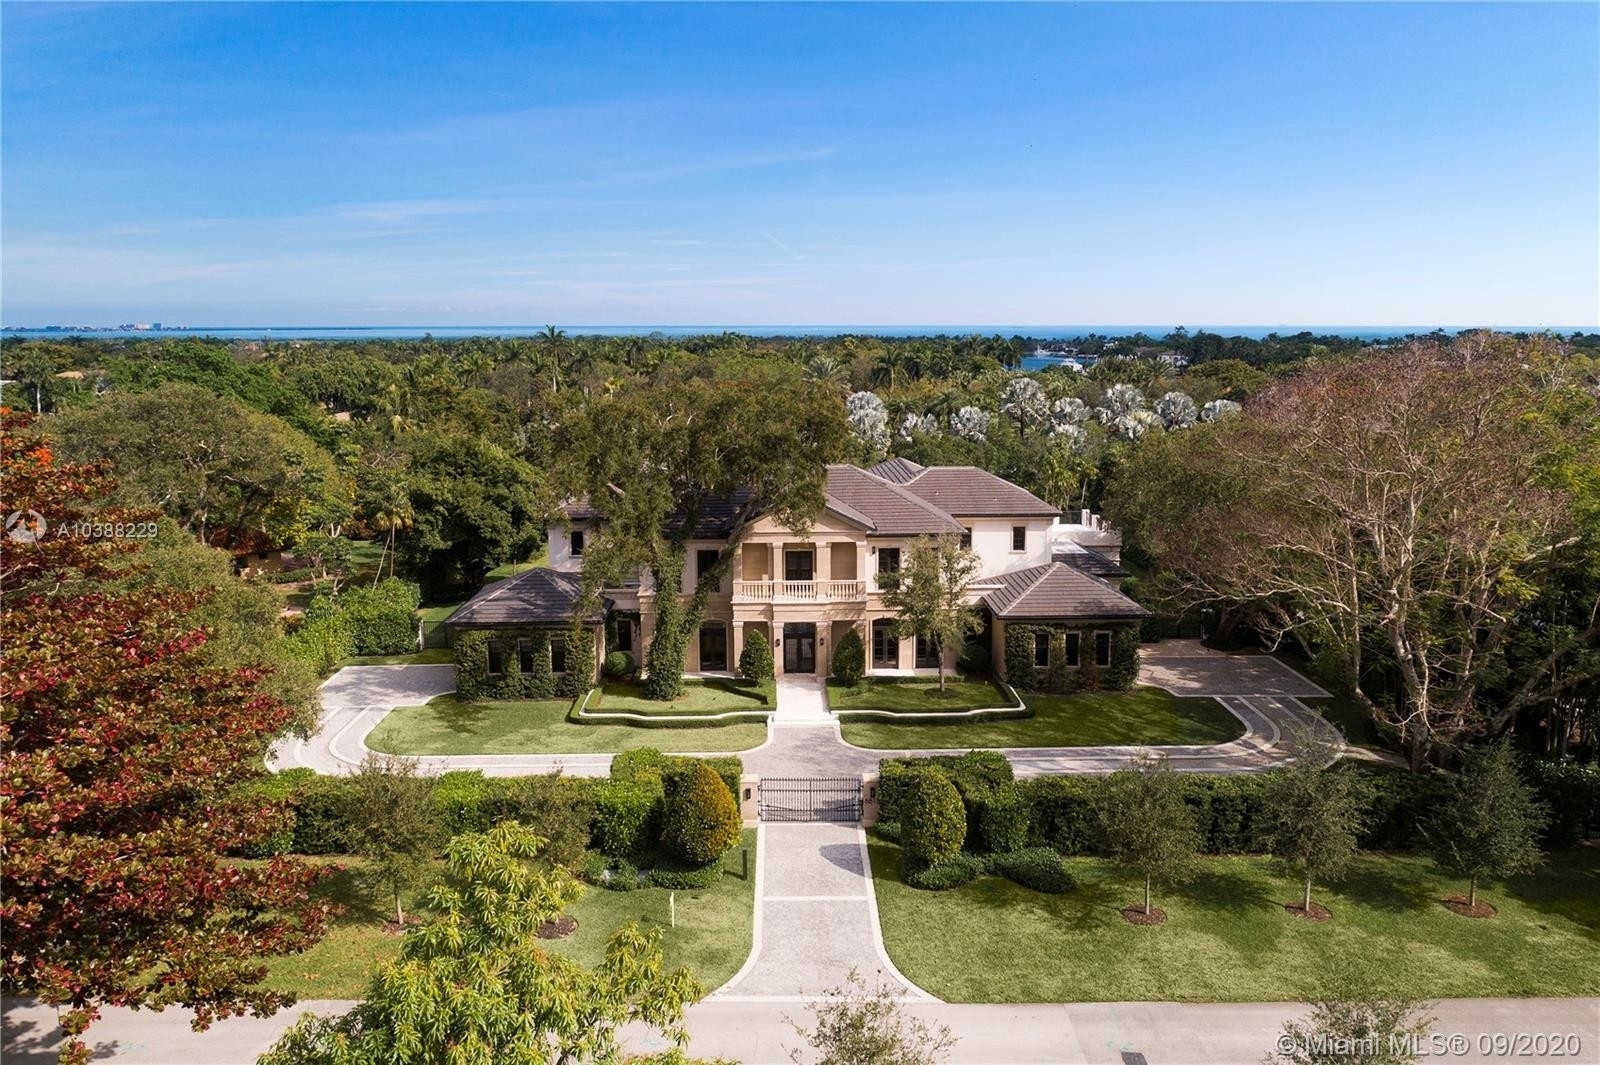 Single Family Home at Coral Gables